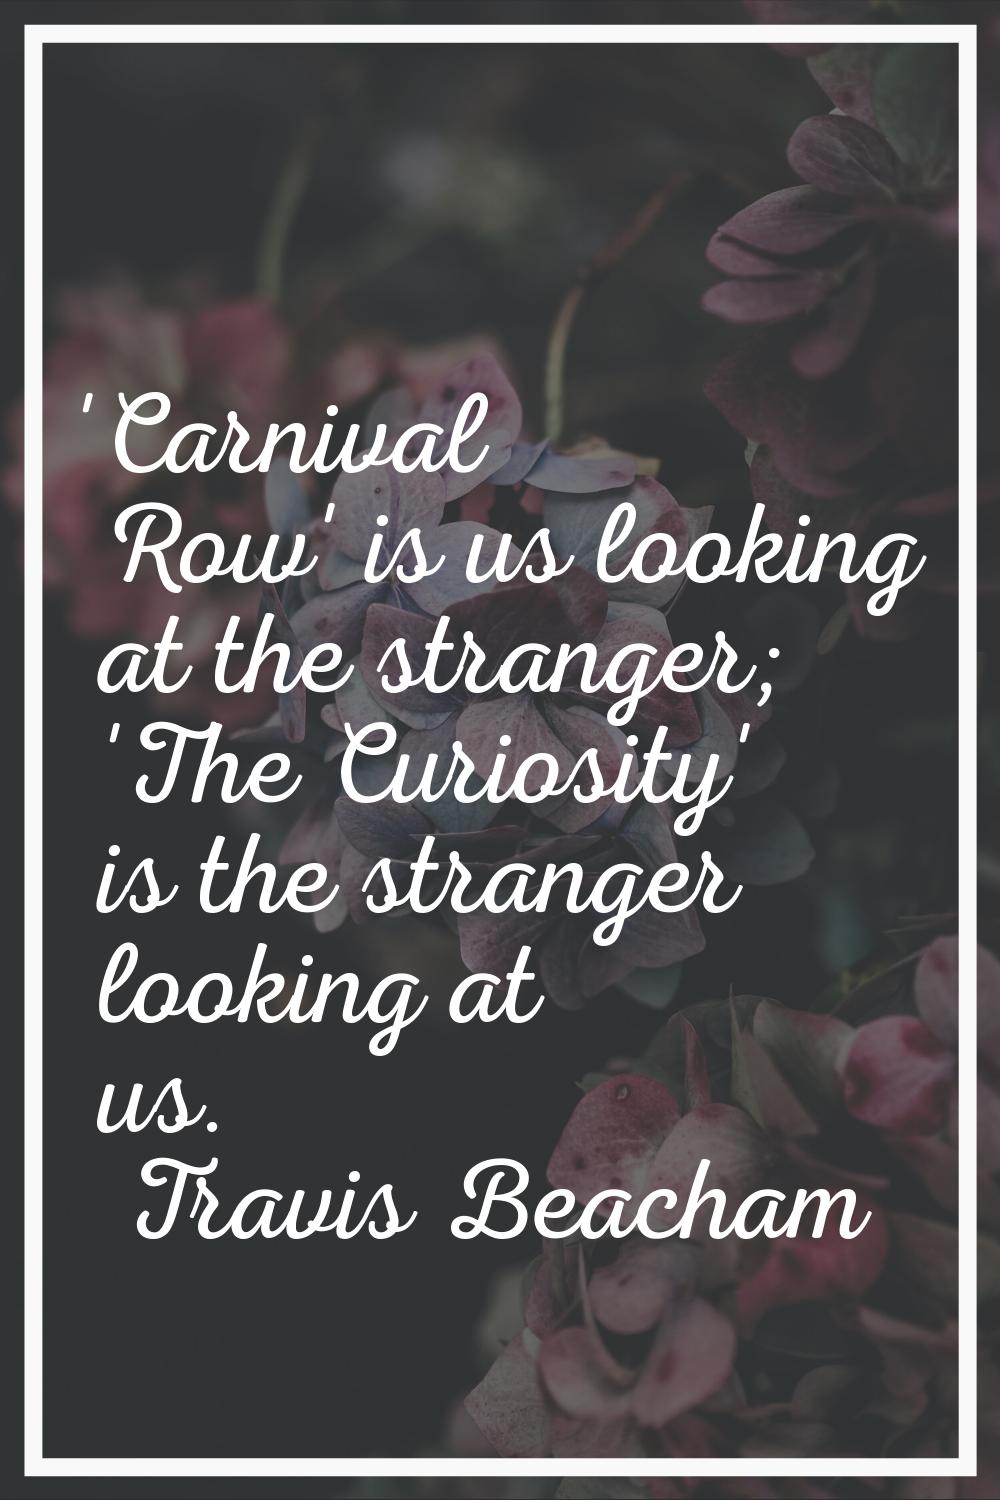 'Carnival Row' is us looking at the stranger; 'The Curiosity' is the stranger looking at us.